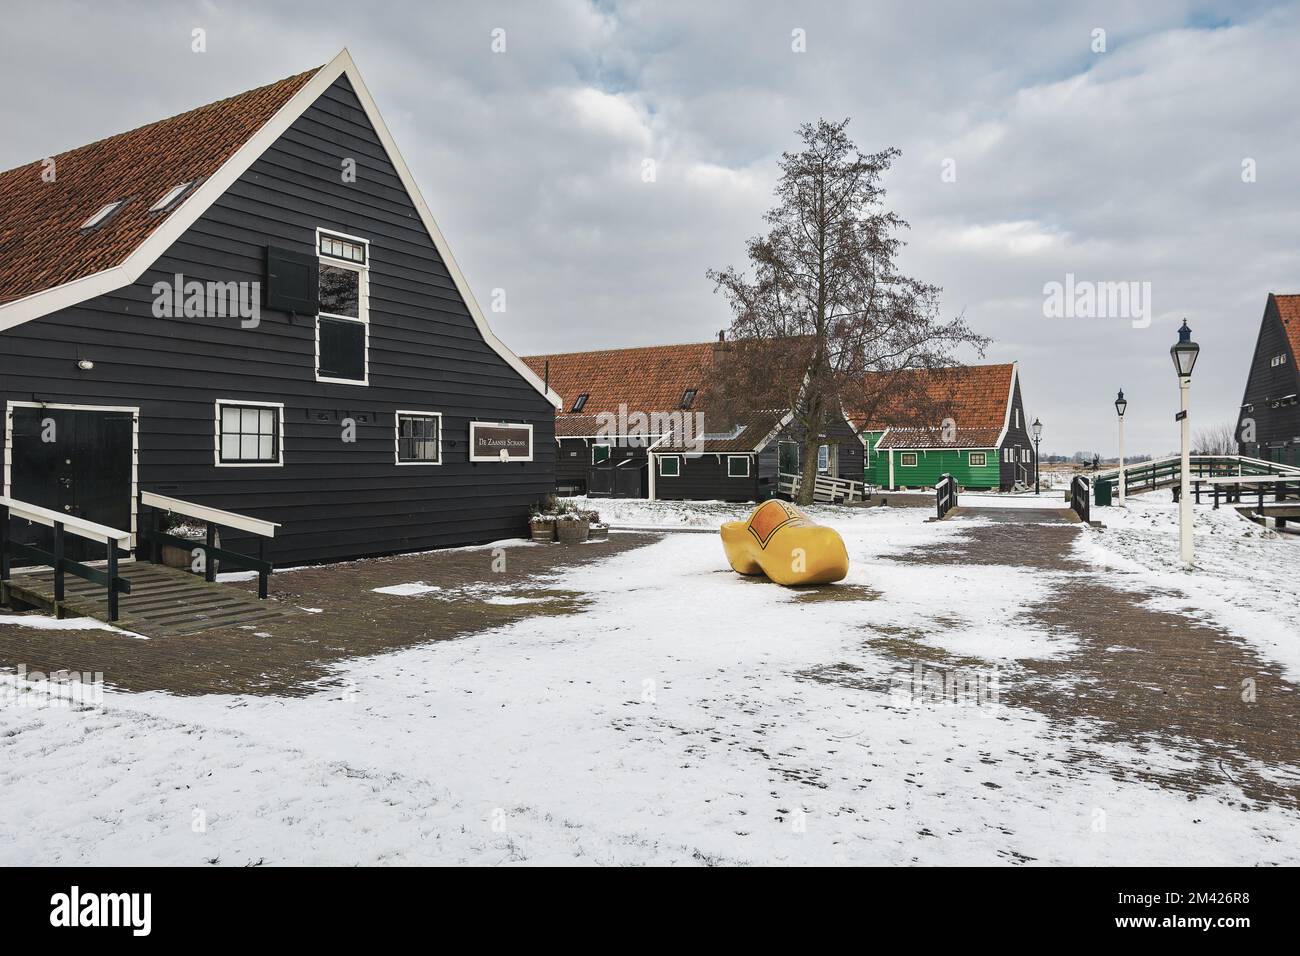 Zaandam, Netherlands, February 10, 2021: The symbol of the Netherlands is a klomp against the backdrop of a winter landscape. Stock Photo